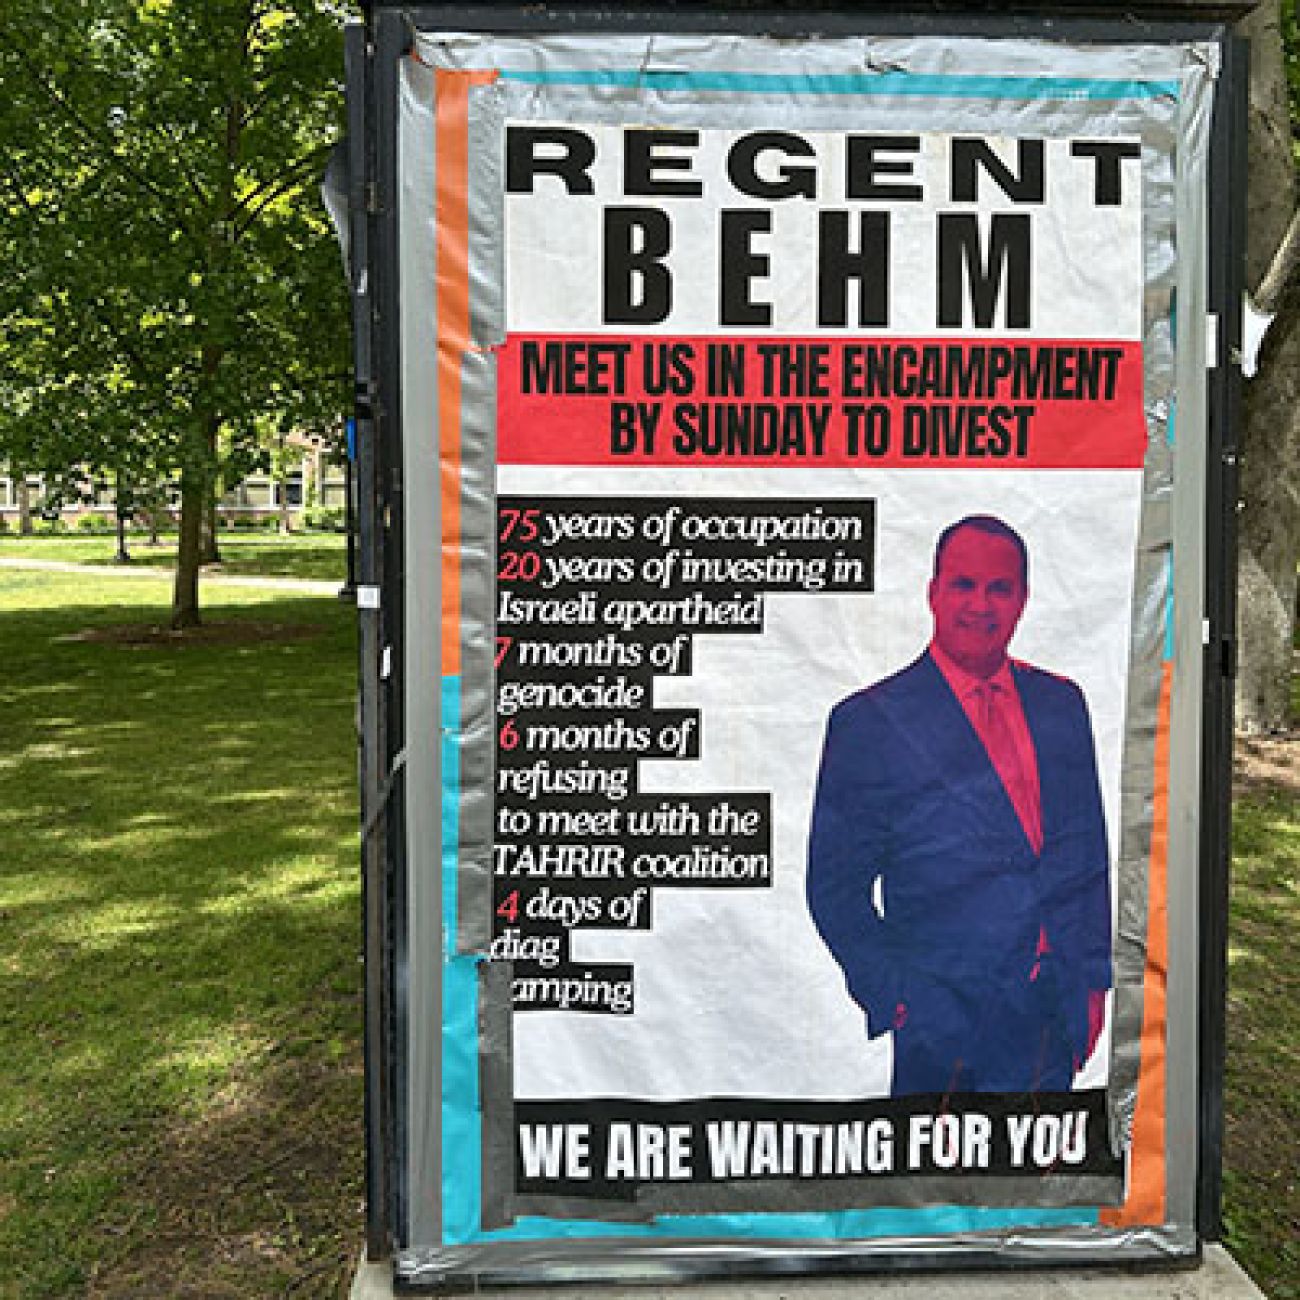 Poster challenging Regent Michael Behm to meet with the camperss